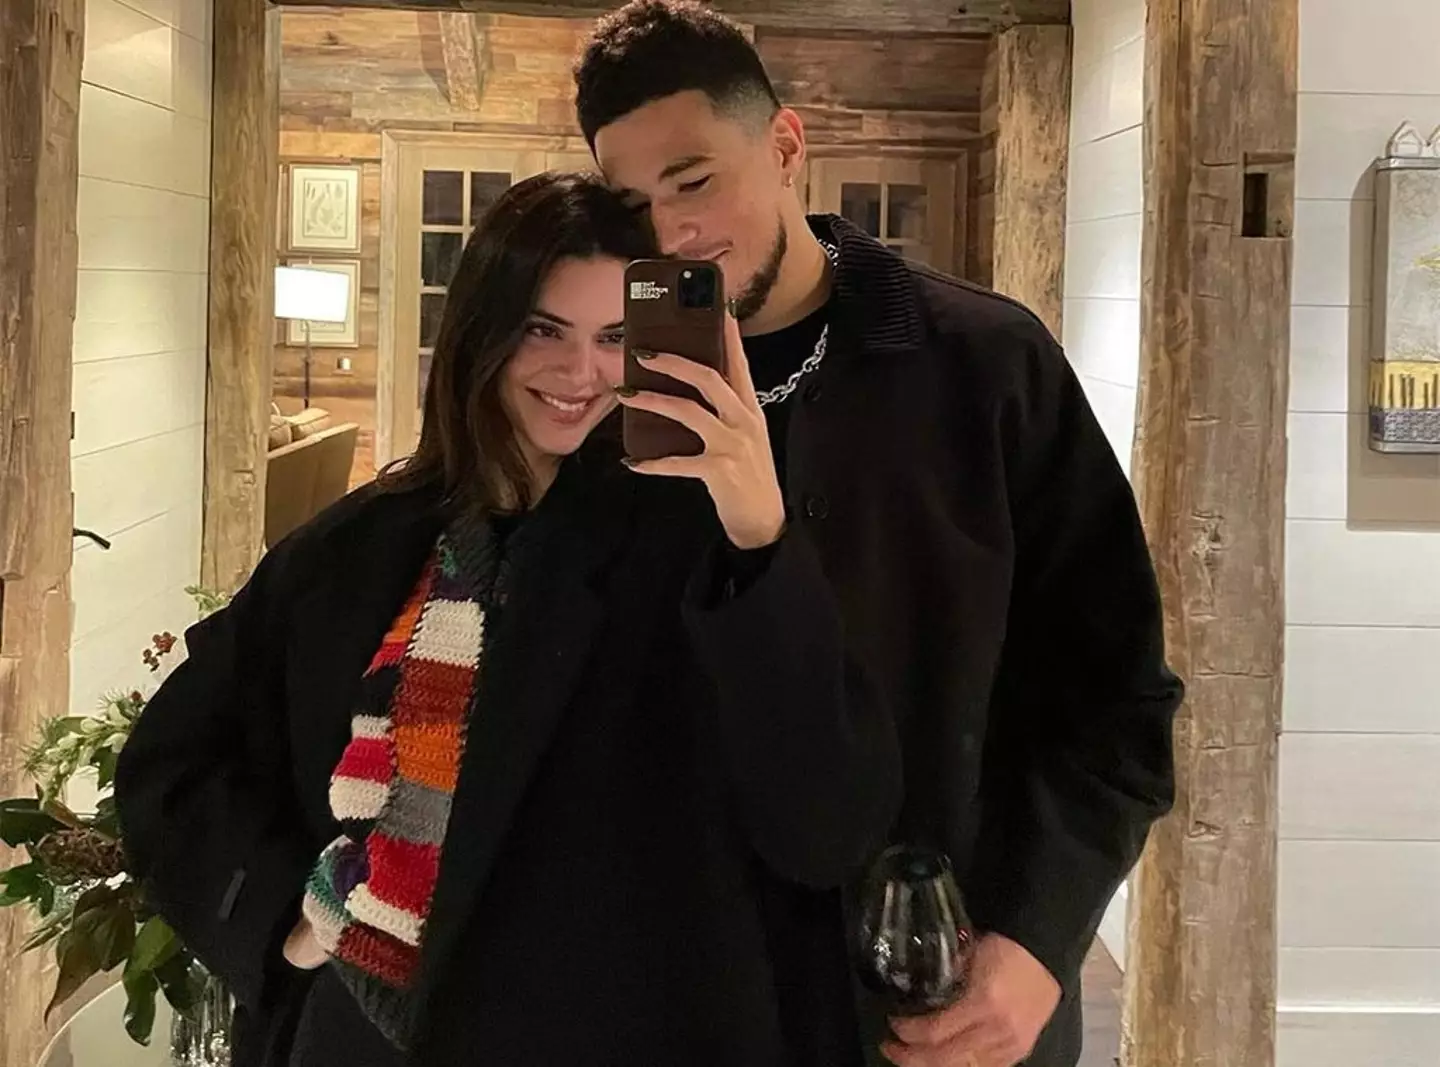 Kendall is dating Devin Booker.